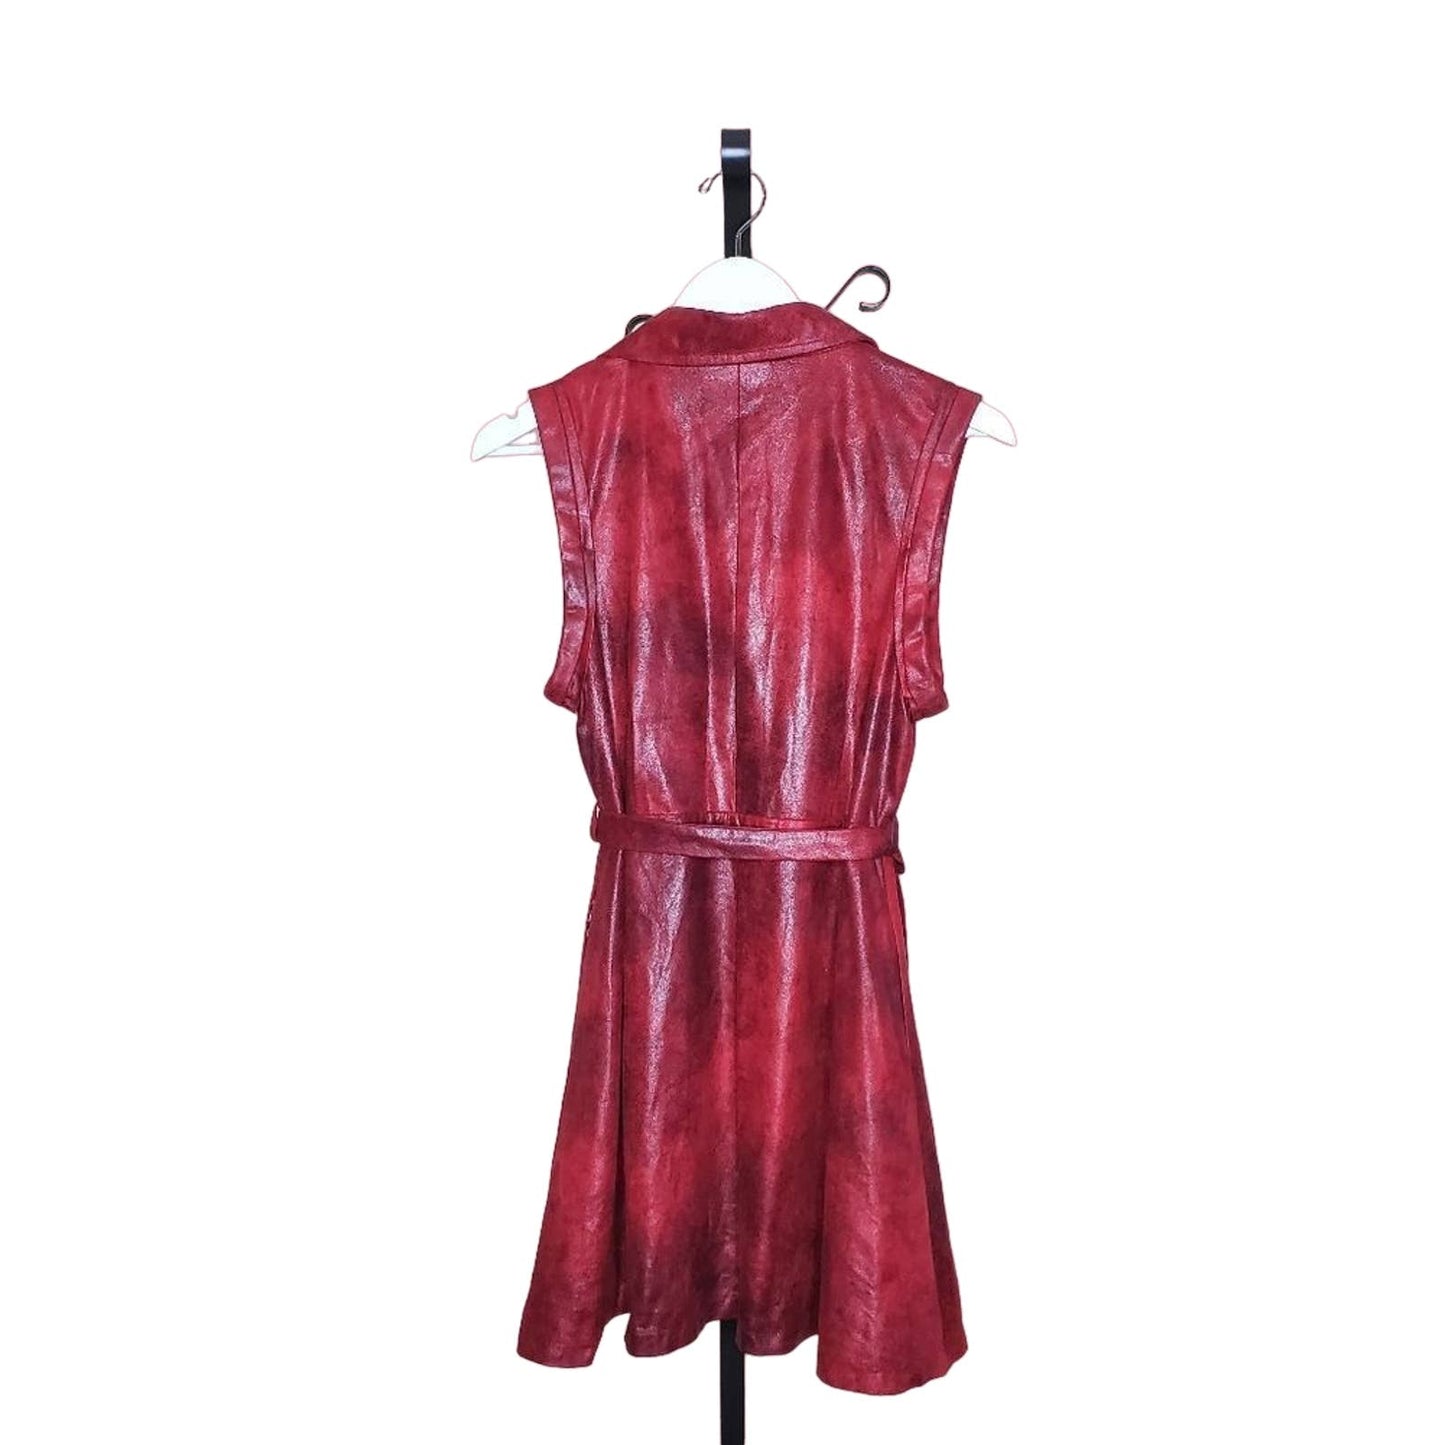 Melody Sleeveless Red Dress with Button Detail and Tie, Size Small